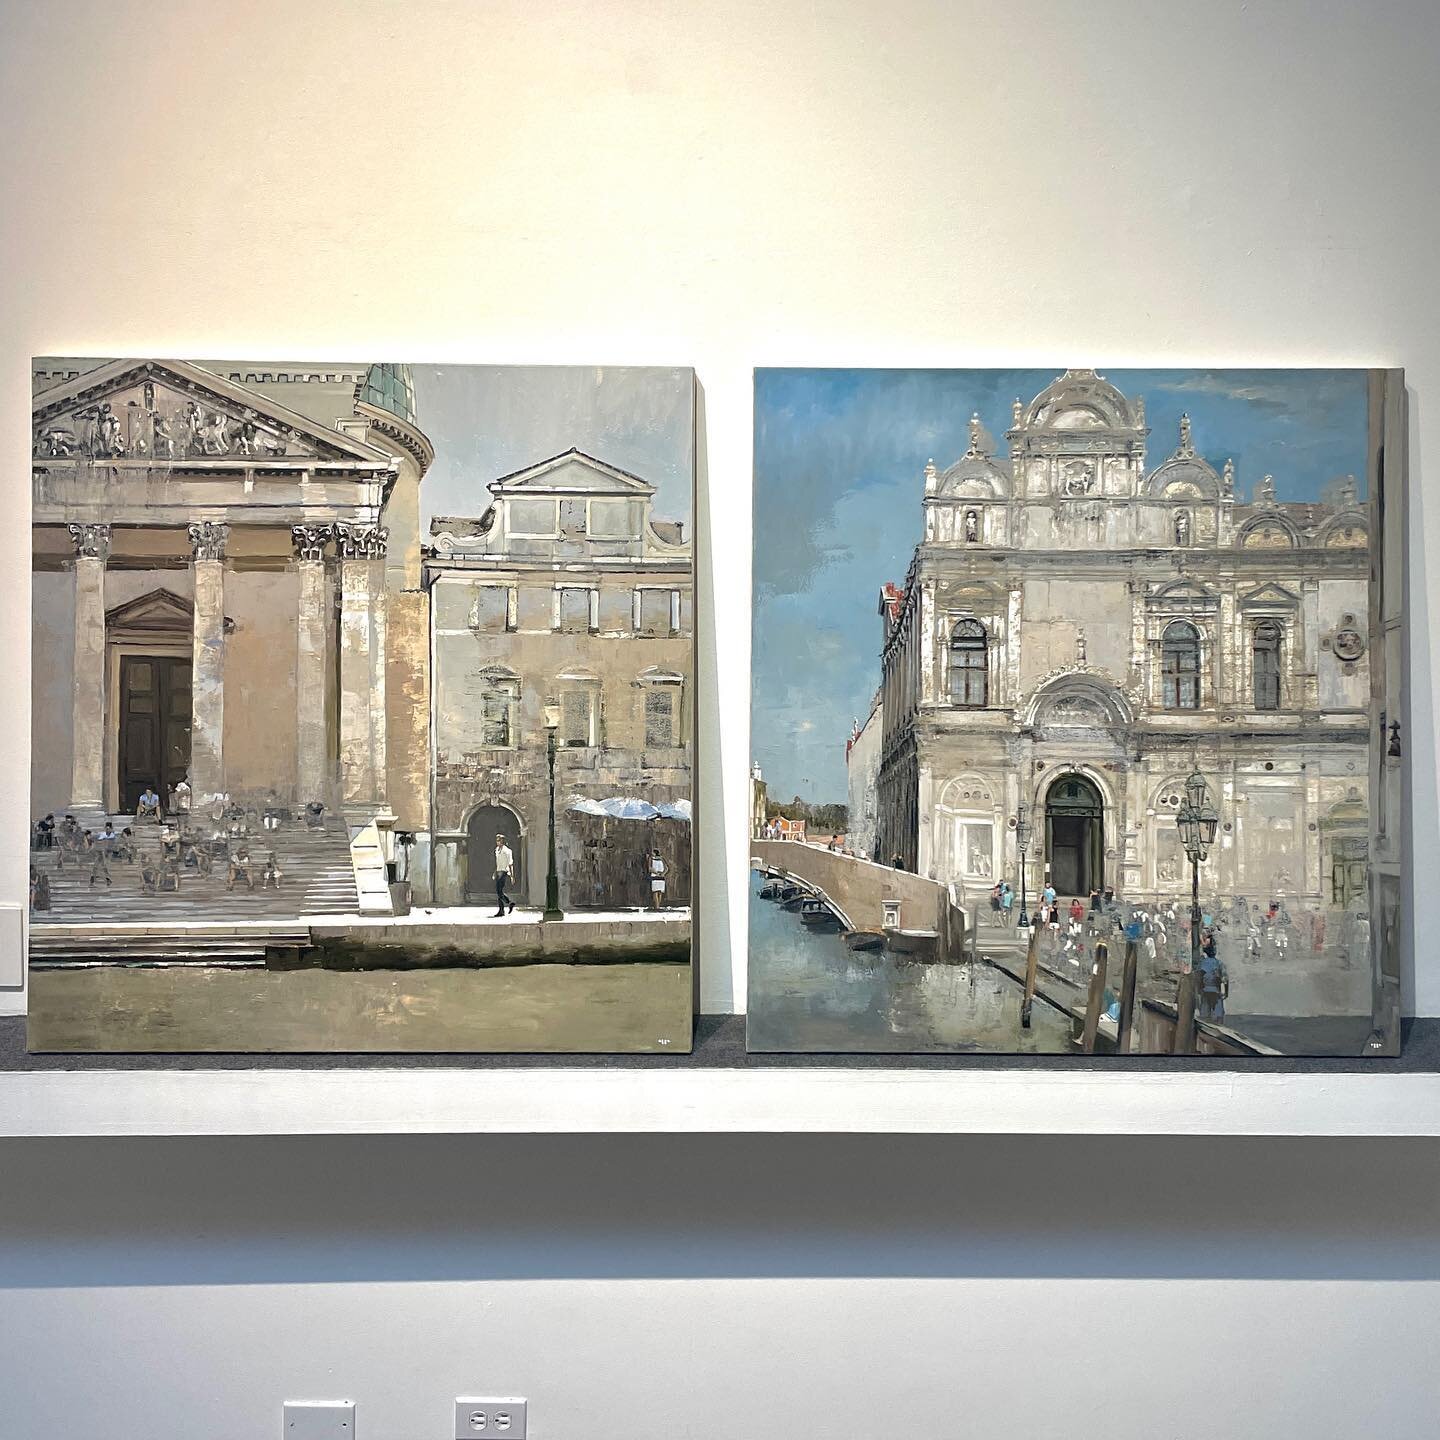 New arrivals by @patrickpietropoli for our upcoming Group Exhibition.
The opening reception for the Annual Group Exhibition will be May 13th 4 - 7 PM!

#painitng #veniceitaly #frenchartist #impressionism #realism